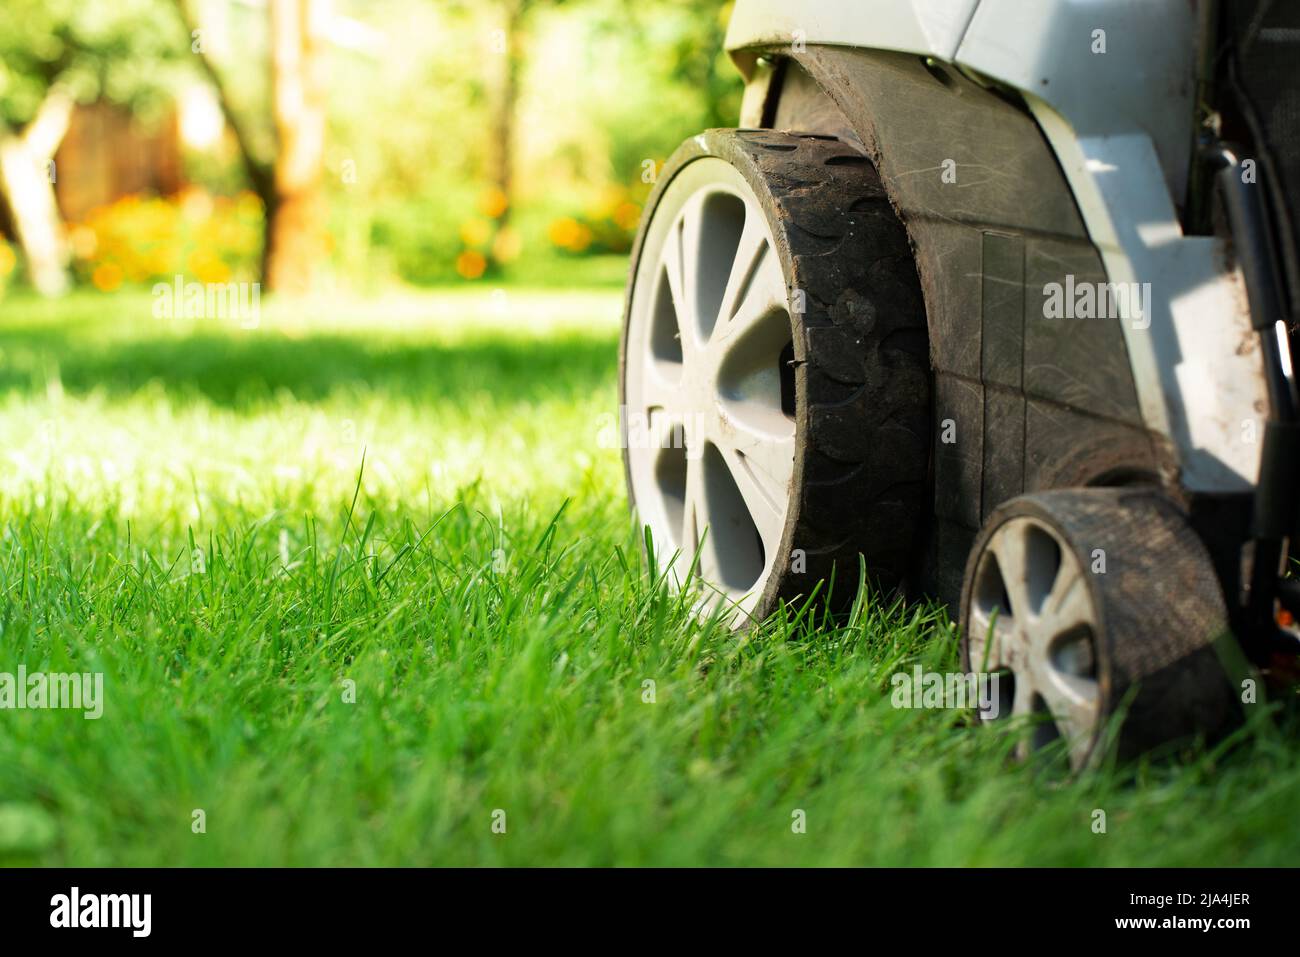 Lawn mower on grass closeup view. Lawn care concept Stock Photo